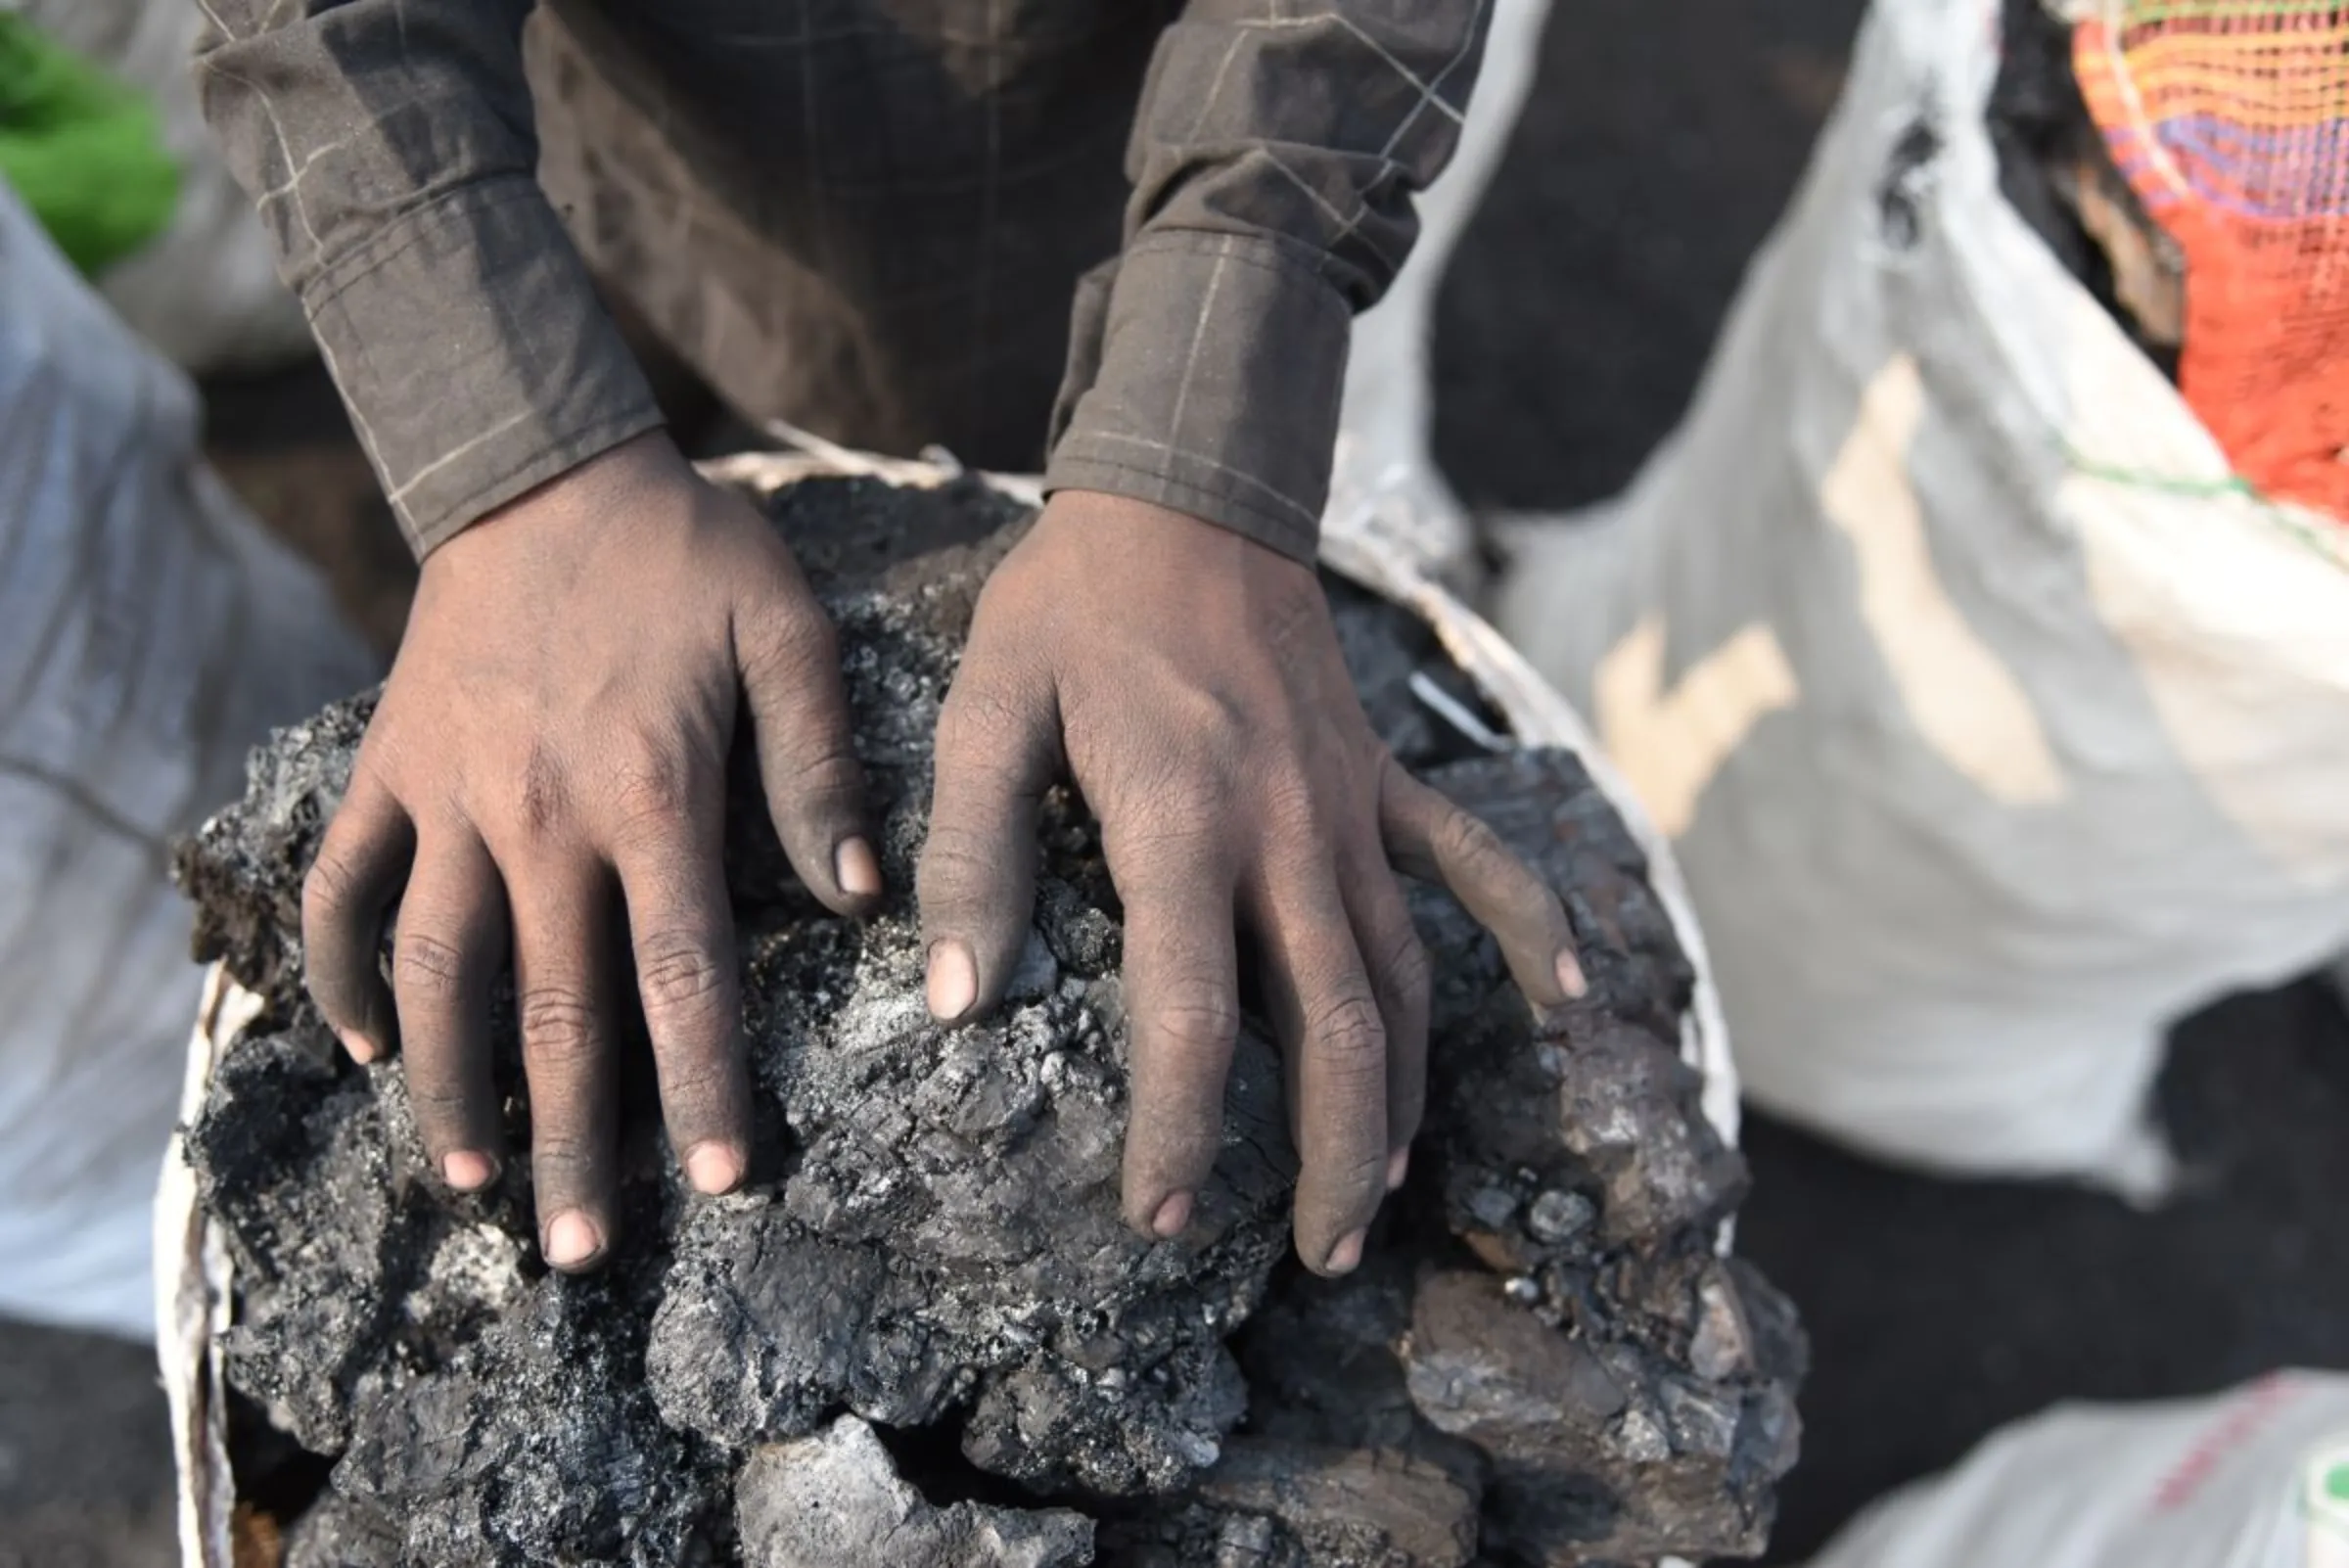 A child puts his hand on a basket of coal he has scavenged in a mining area of Jharia coalfield, India, November 11, 2022. Thomson Reuters Foundation/Tanmoy Bhaduri